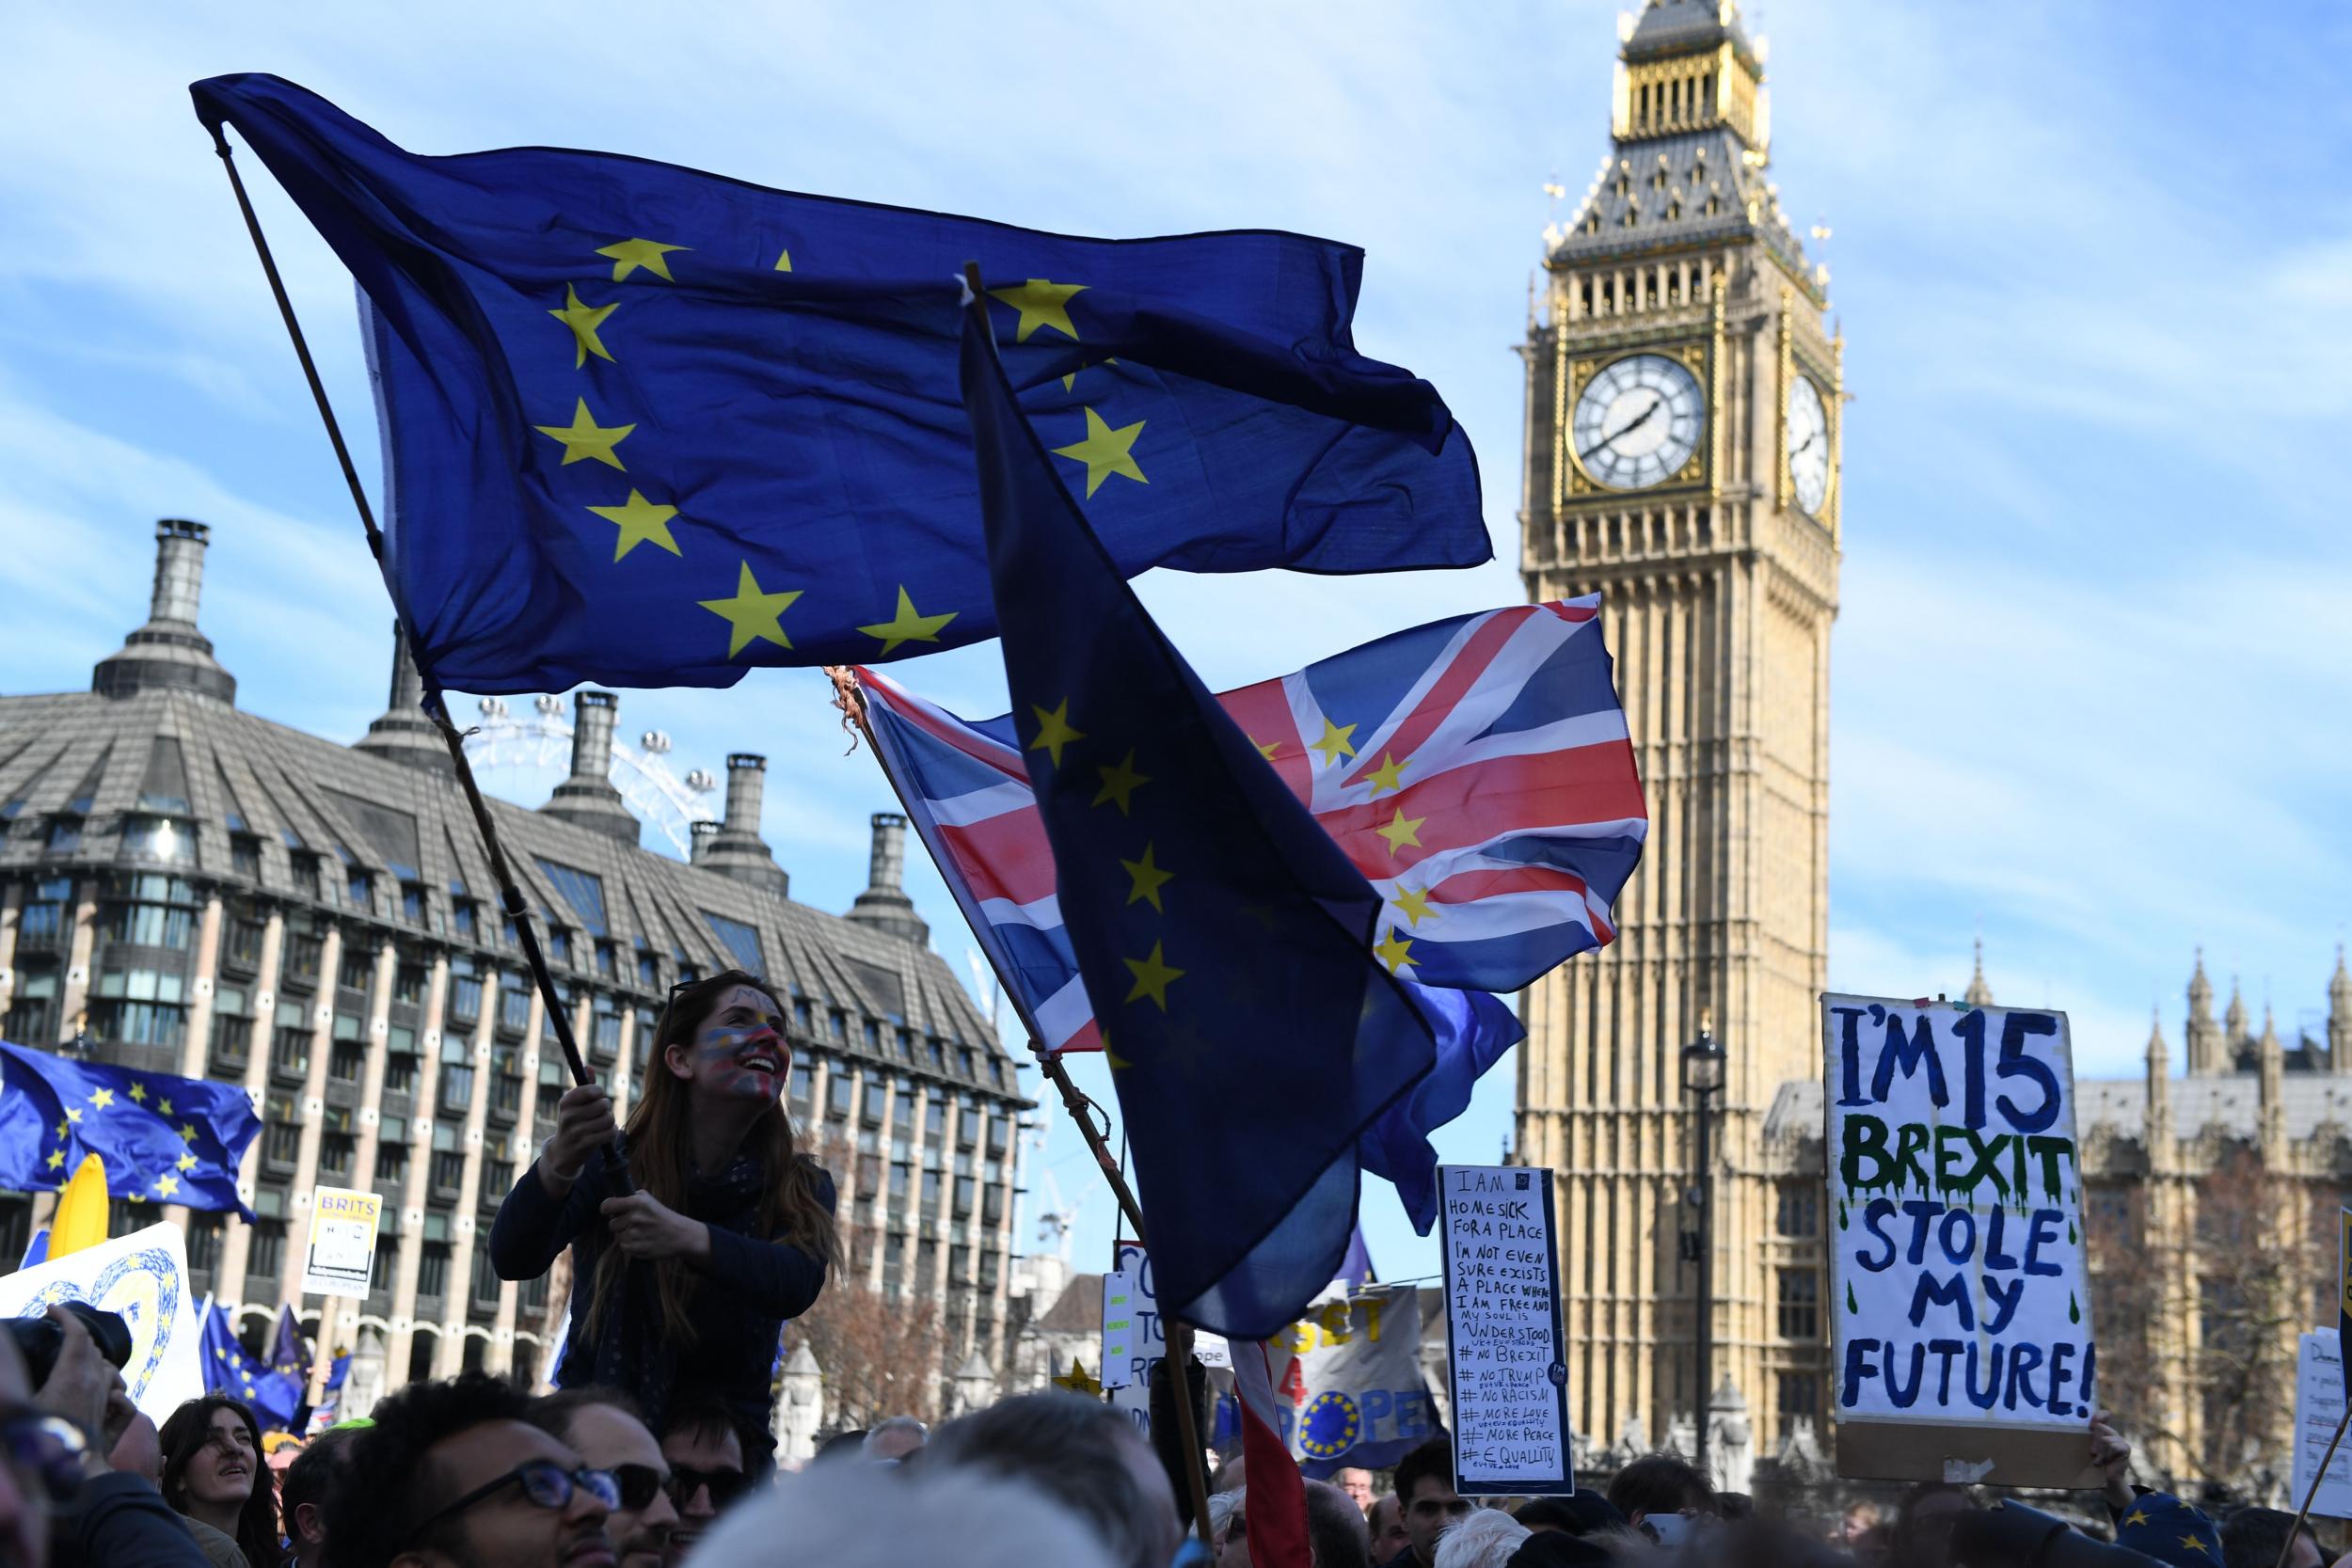 Demonstrators wave EU flags and union flags in Parliament Square, protesting against the Government's steps towards leaving the European Union